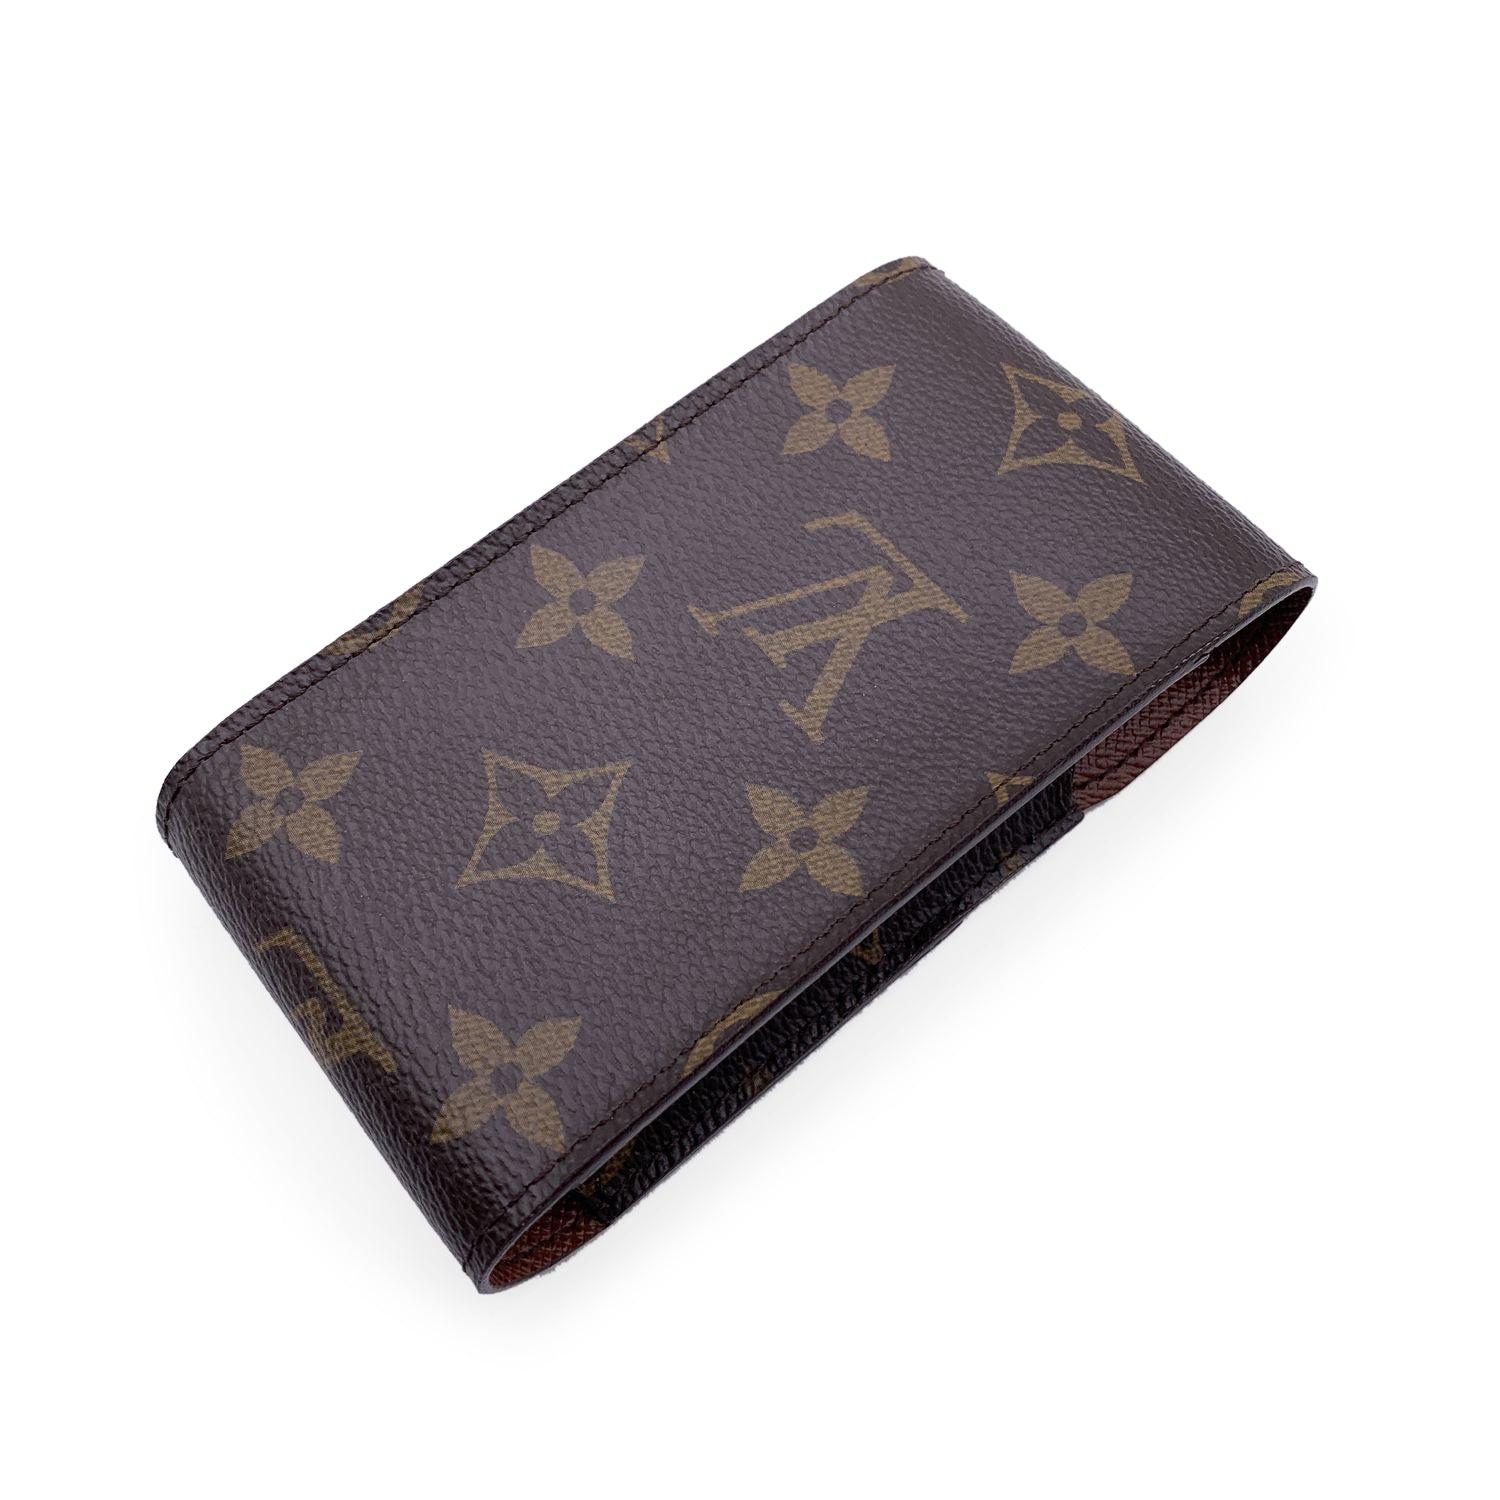 This cigarette case by LOUIS VUITTON is a discreet and practical accessory. The flap of this cigarette case in Monogram canvas slips securely into the base to form a pouch to hold cigarette or bills or to create an elegant holder for whatever you